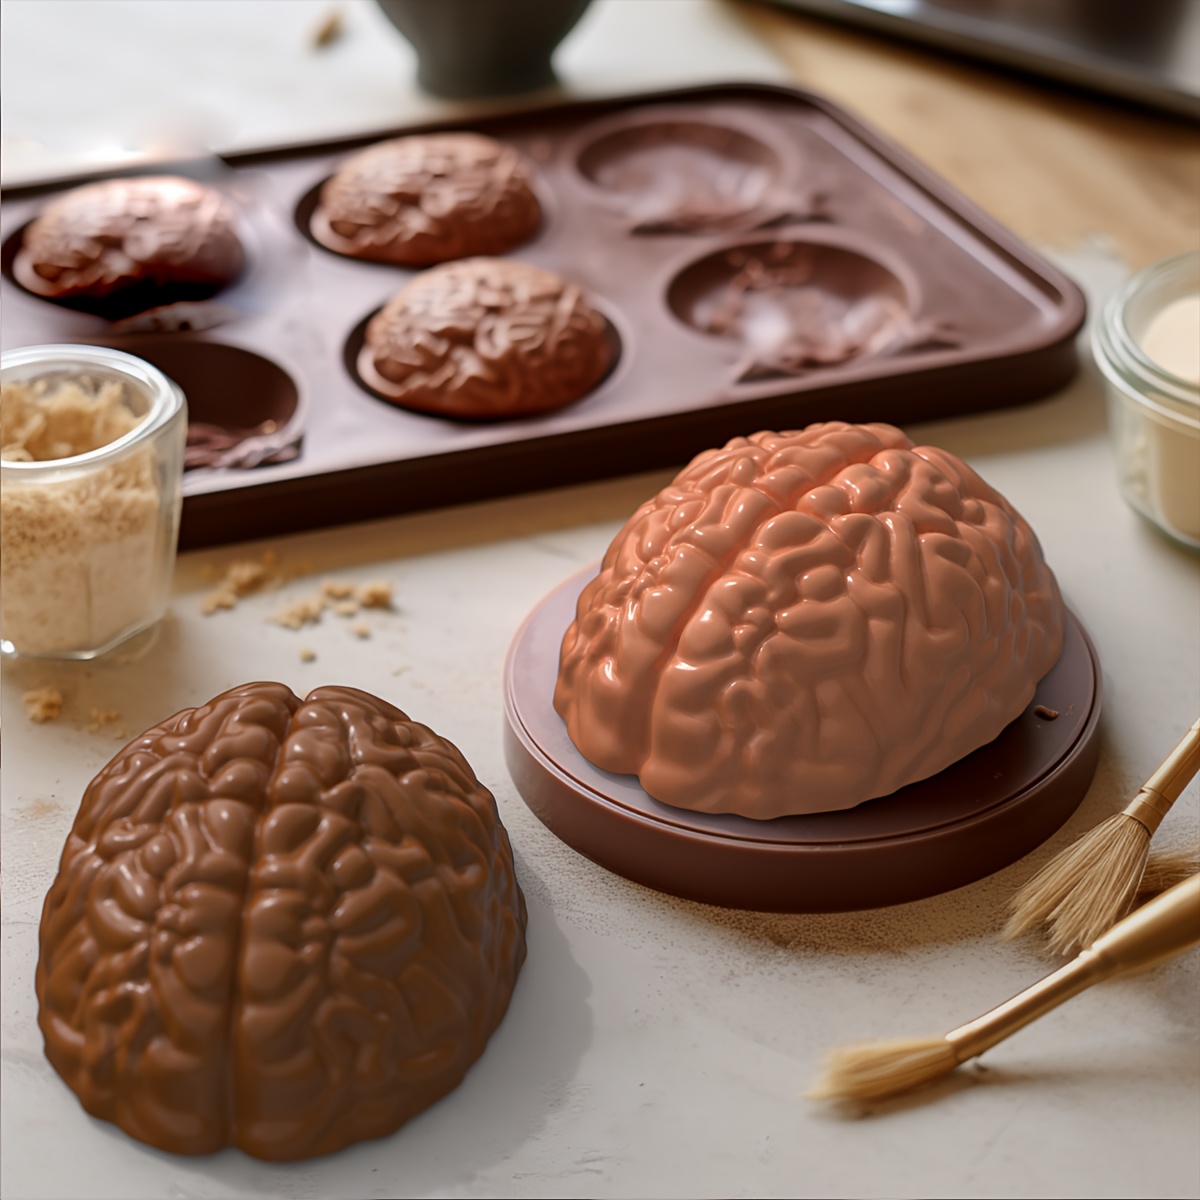 Creative Brain Ice Cube Tray Funny 4 Holes Brain Cookies Chocolate Baking  Silicone Freeze Mould Kitchen Bar Halloween Party Tools VT1528 From  Homedec888, $1.77